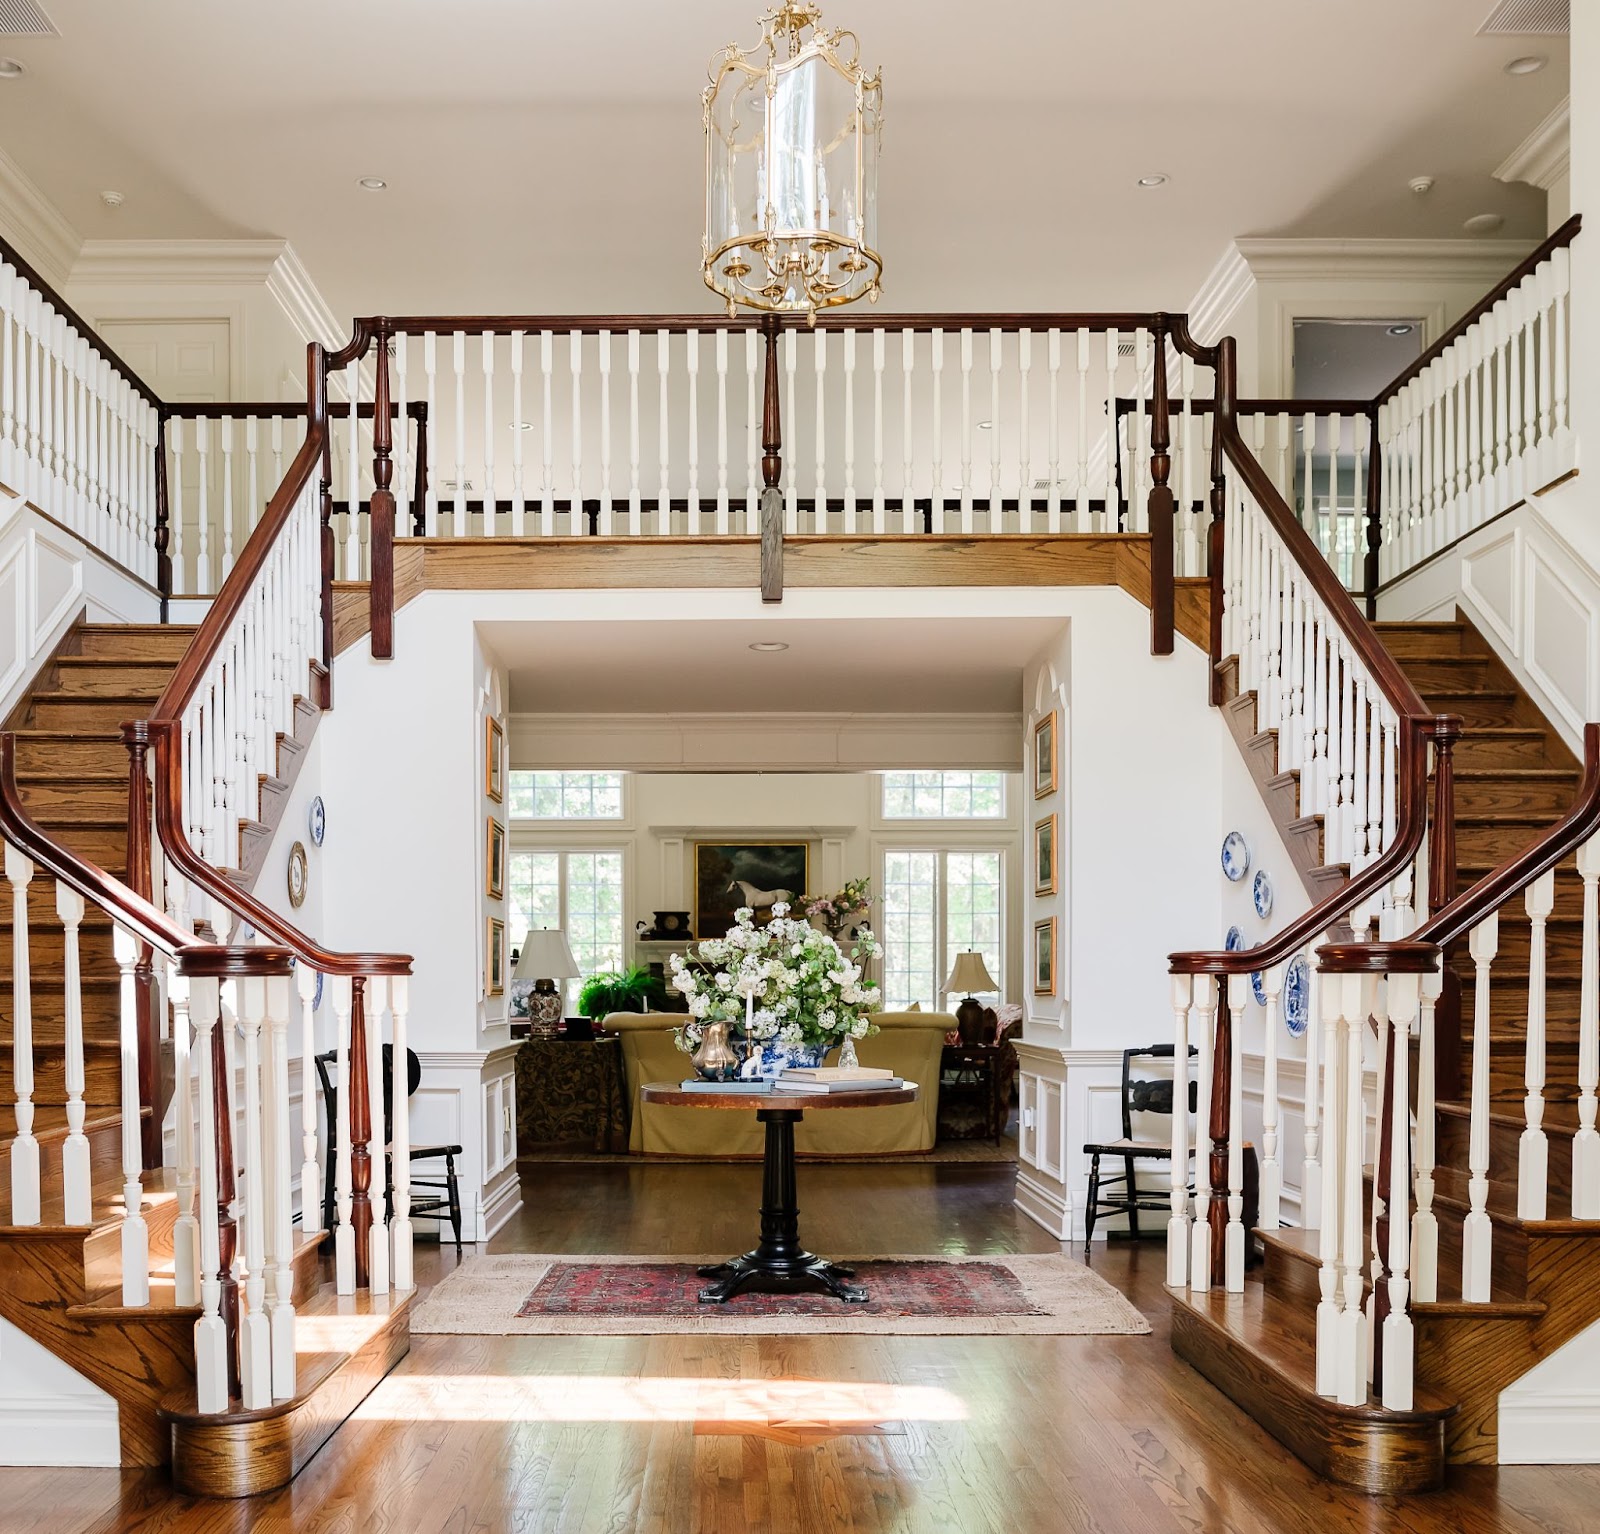 A grand foyer featuring a curved  double staircase, large chandelier, and a pedestal table with a large flower arrangement. A nicely decorated living room is in the background.